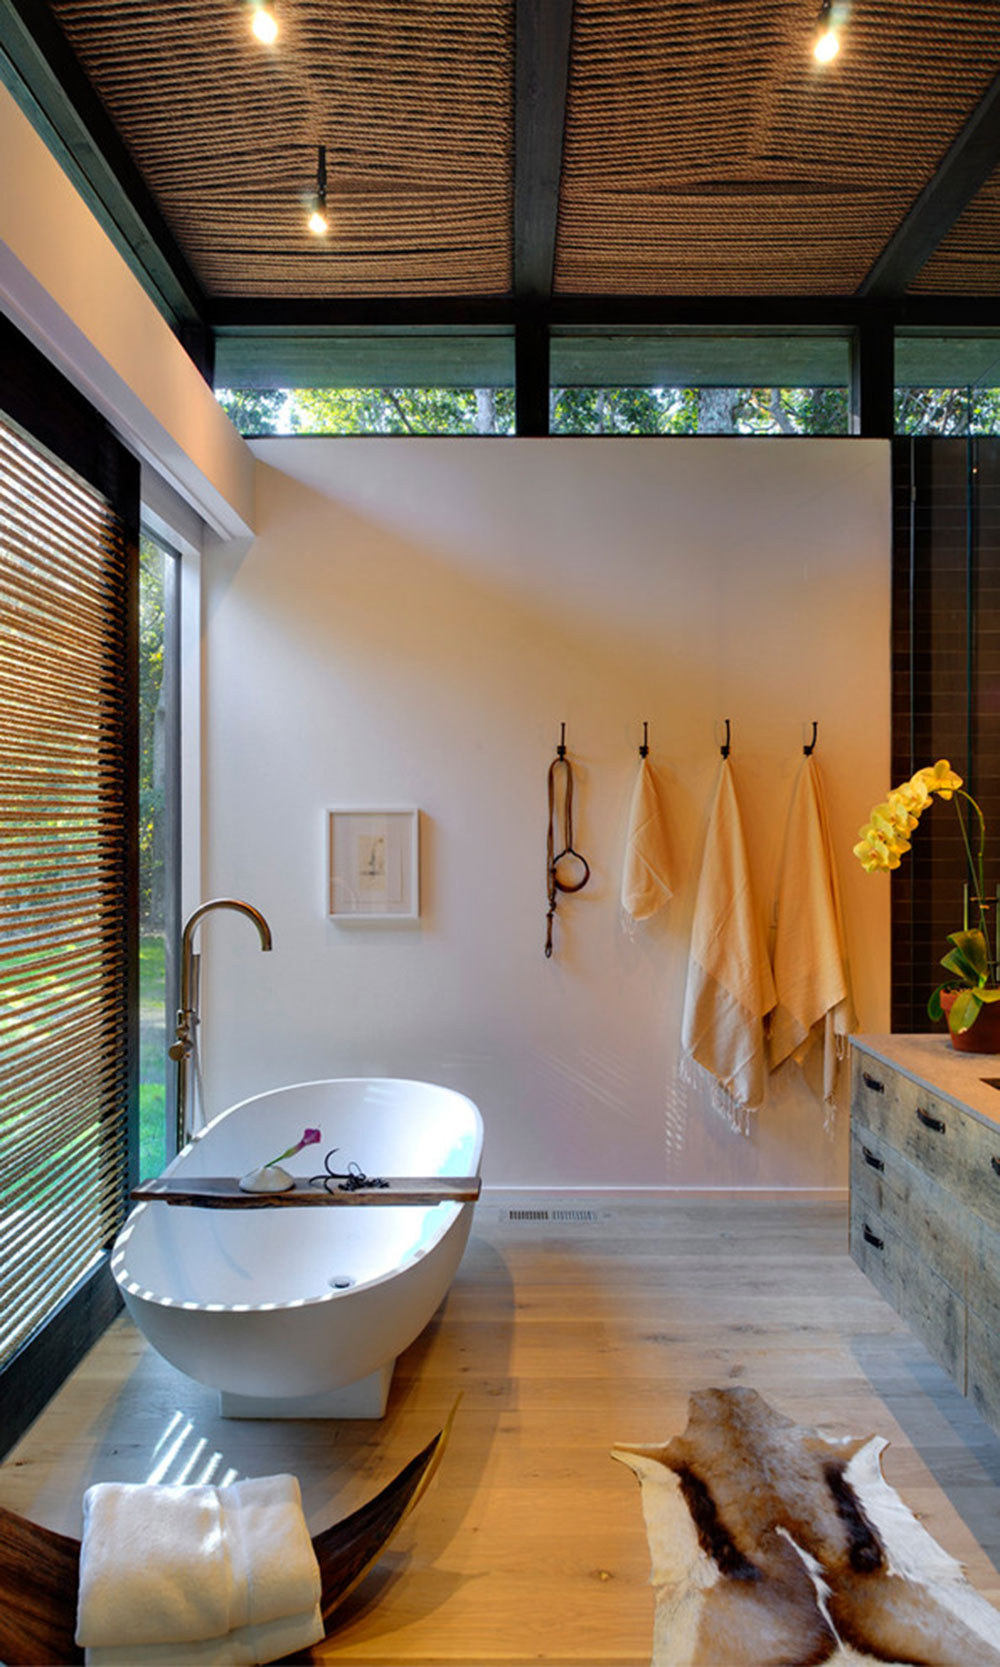 Robins-Way-by-Bates-Masi-Architects-LLC Small bathroom remodel tips to do it properly